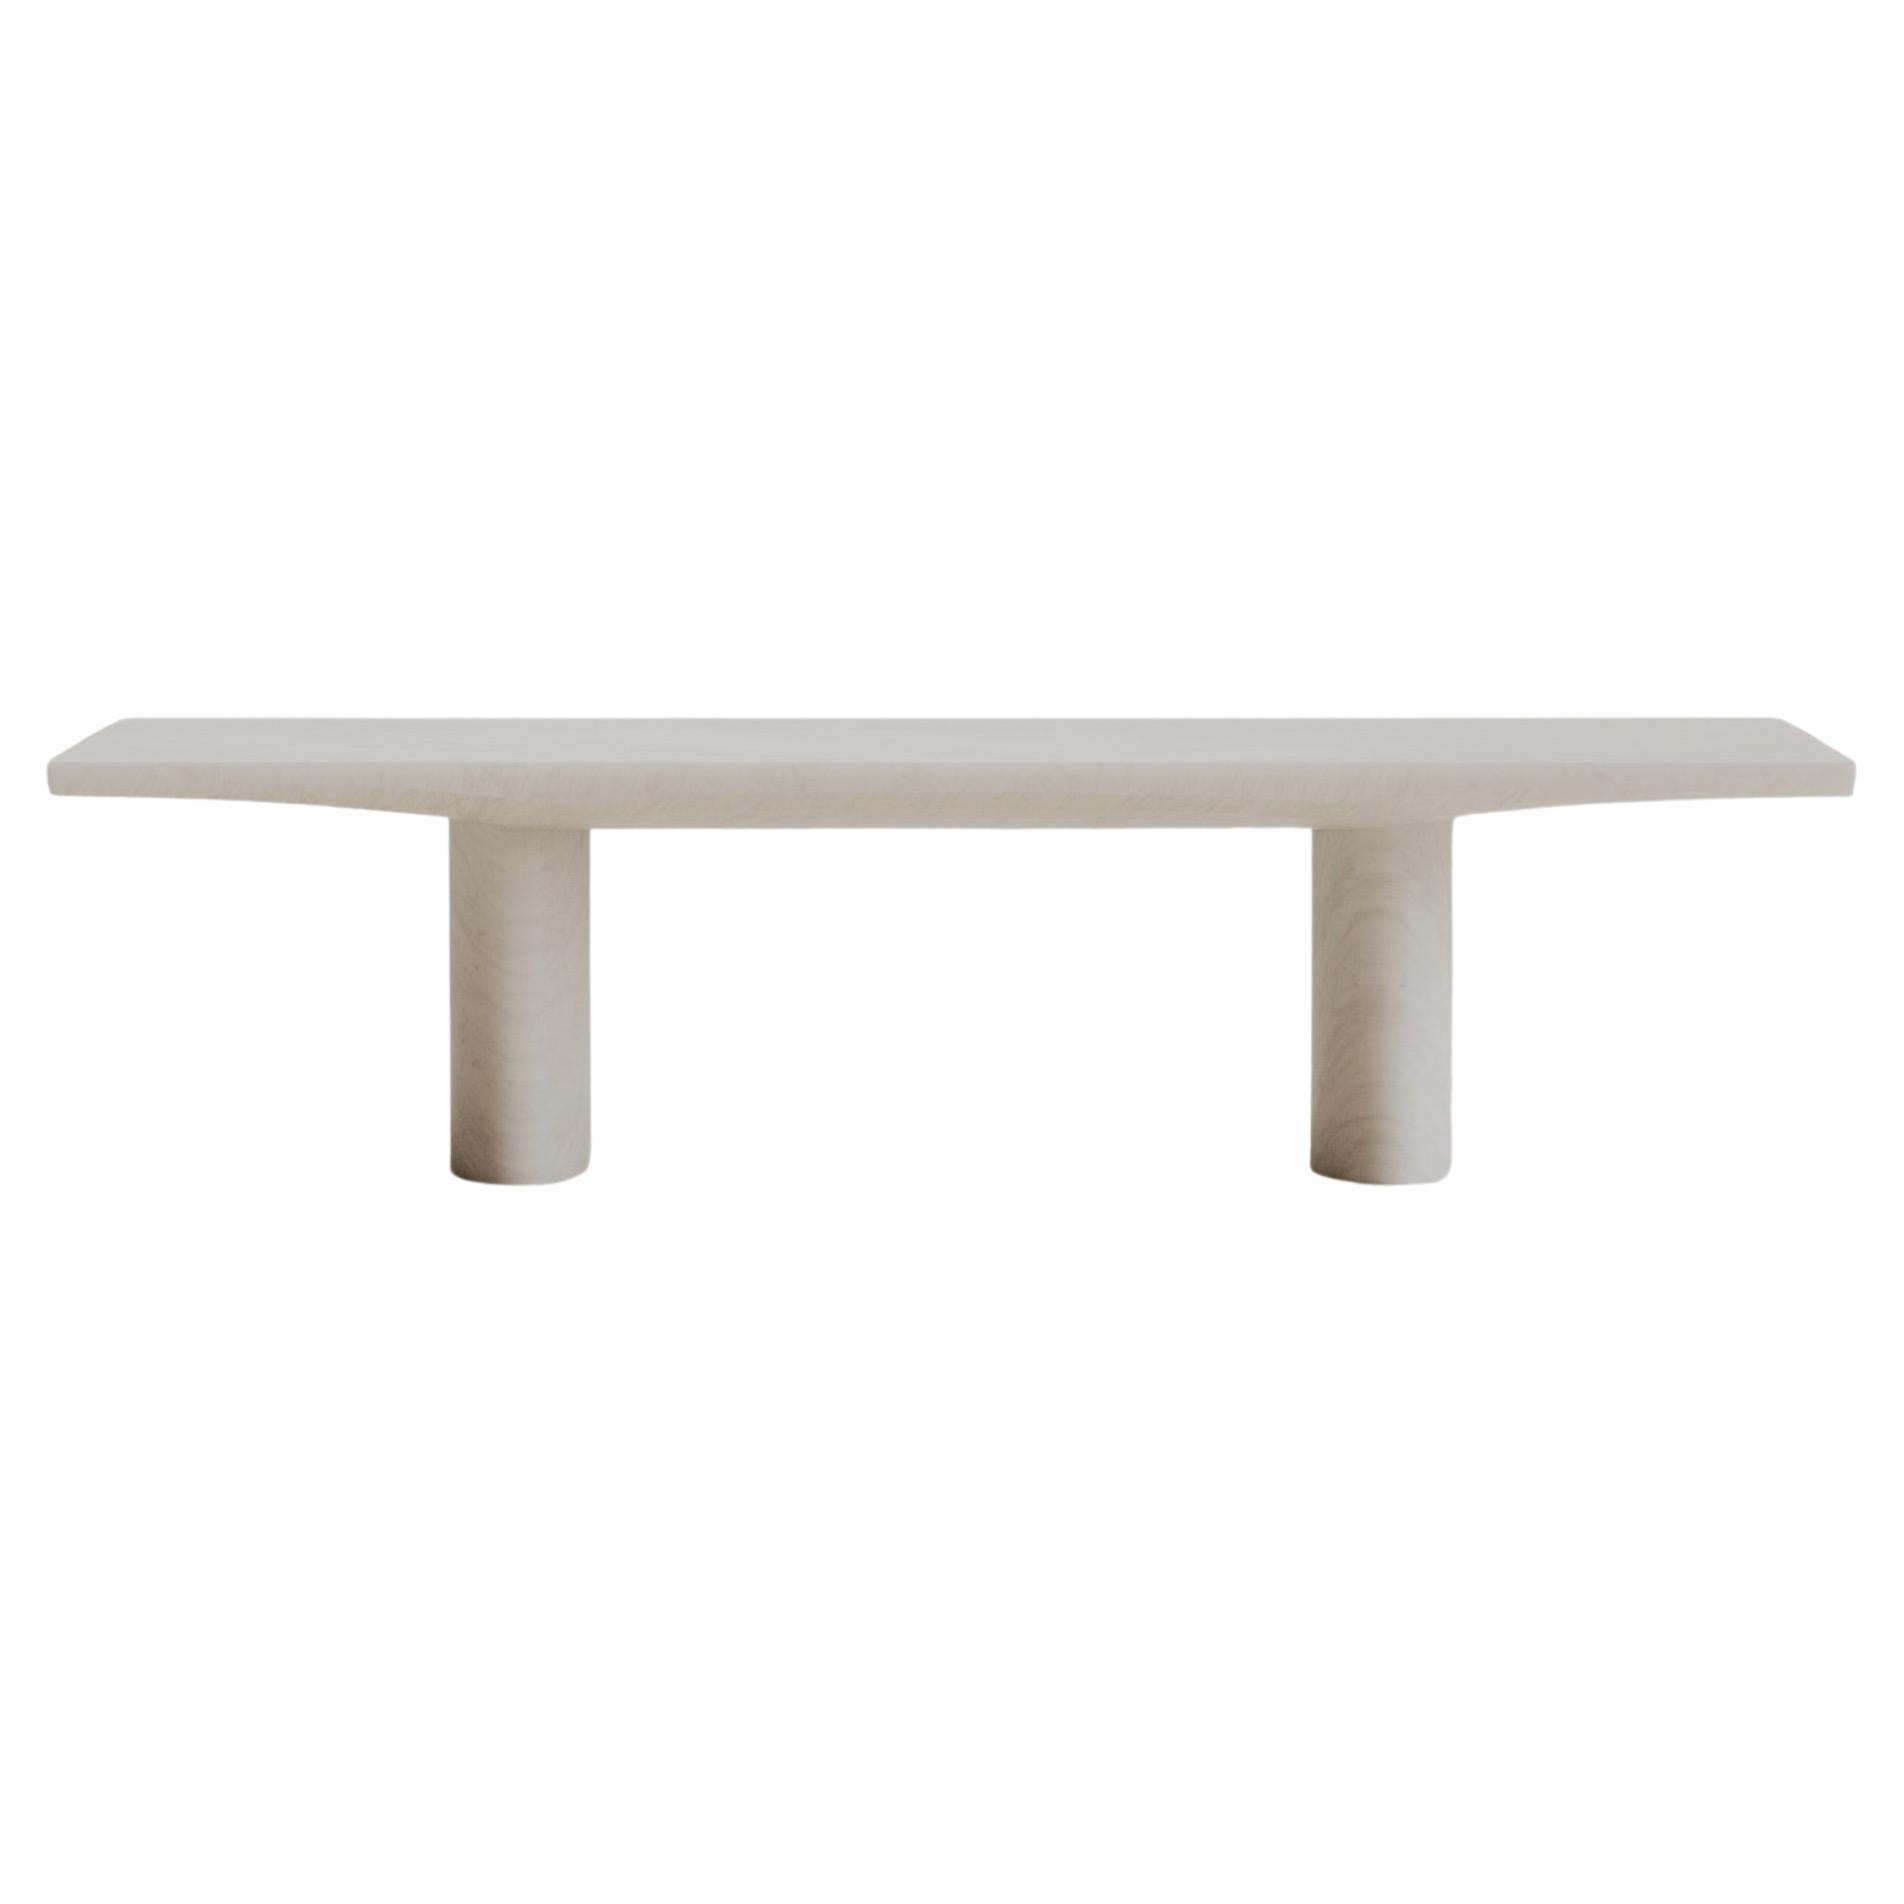 Solid White Marble Abraccio Dining Table 300 by Studio Narra For Sale